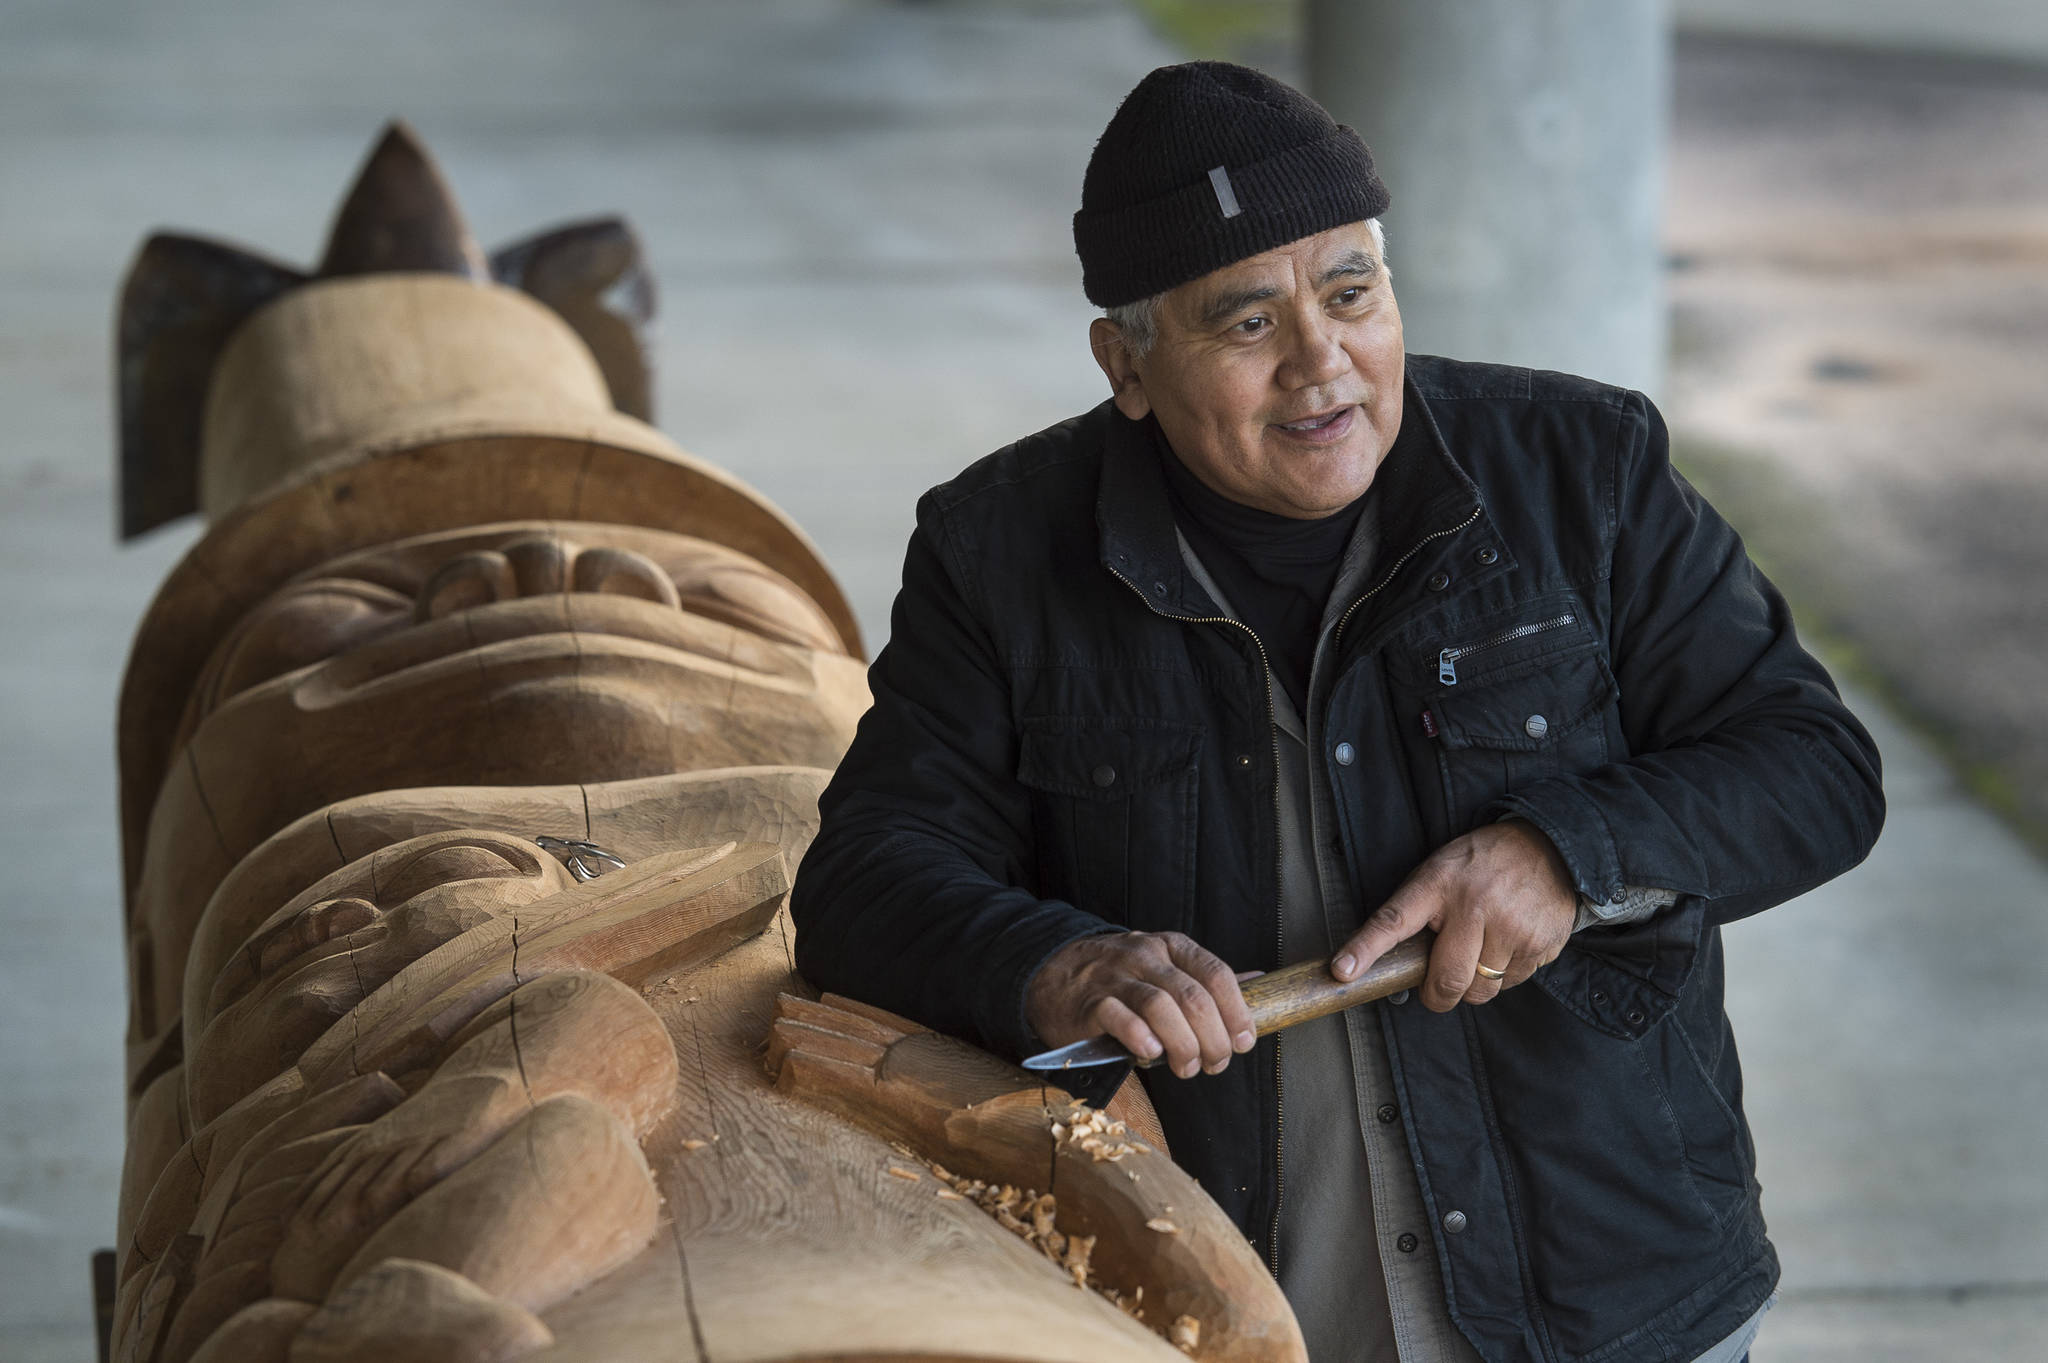 Wayne Price, master Tlingit carver and Associate Professor of Northwest Coast Arts and Sciences, works on a healing pole at the University of Alaska Southeast on Wednesday, Oct. 31, 2018. The pole will be erected with a screen at AWARE’s women’s transitional housing at Twin Lakes in April. (Michael Penn | Capital City Weekly)